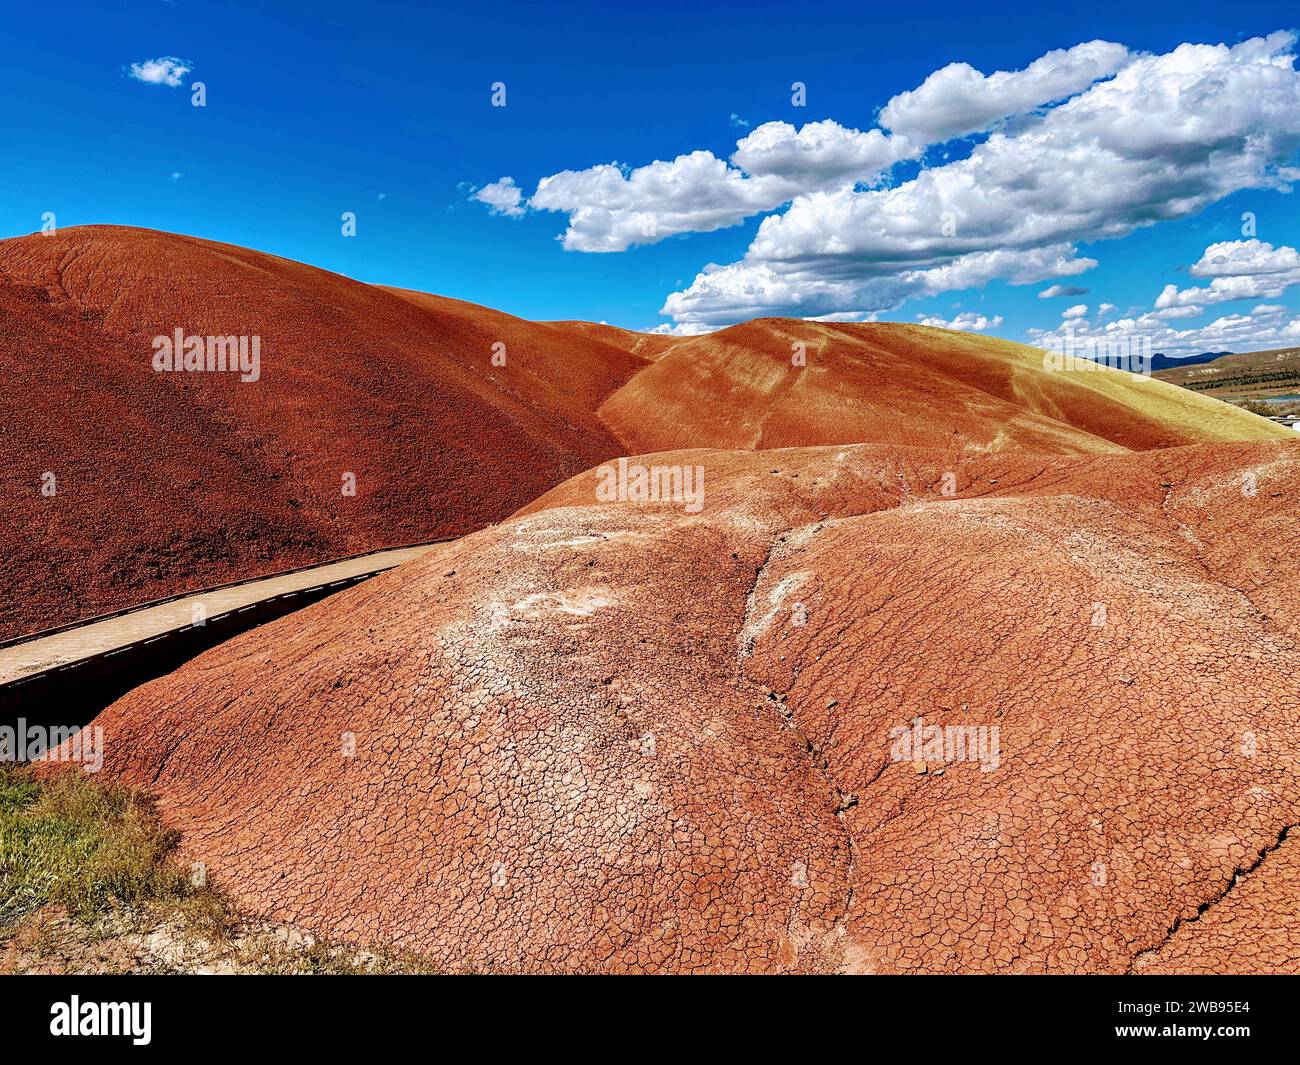 A scenic view of a winding road that leads through a mountainous landscape and transitions into a desert area Stock Photo